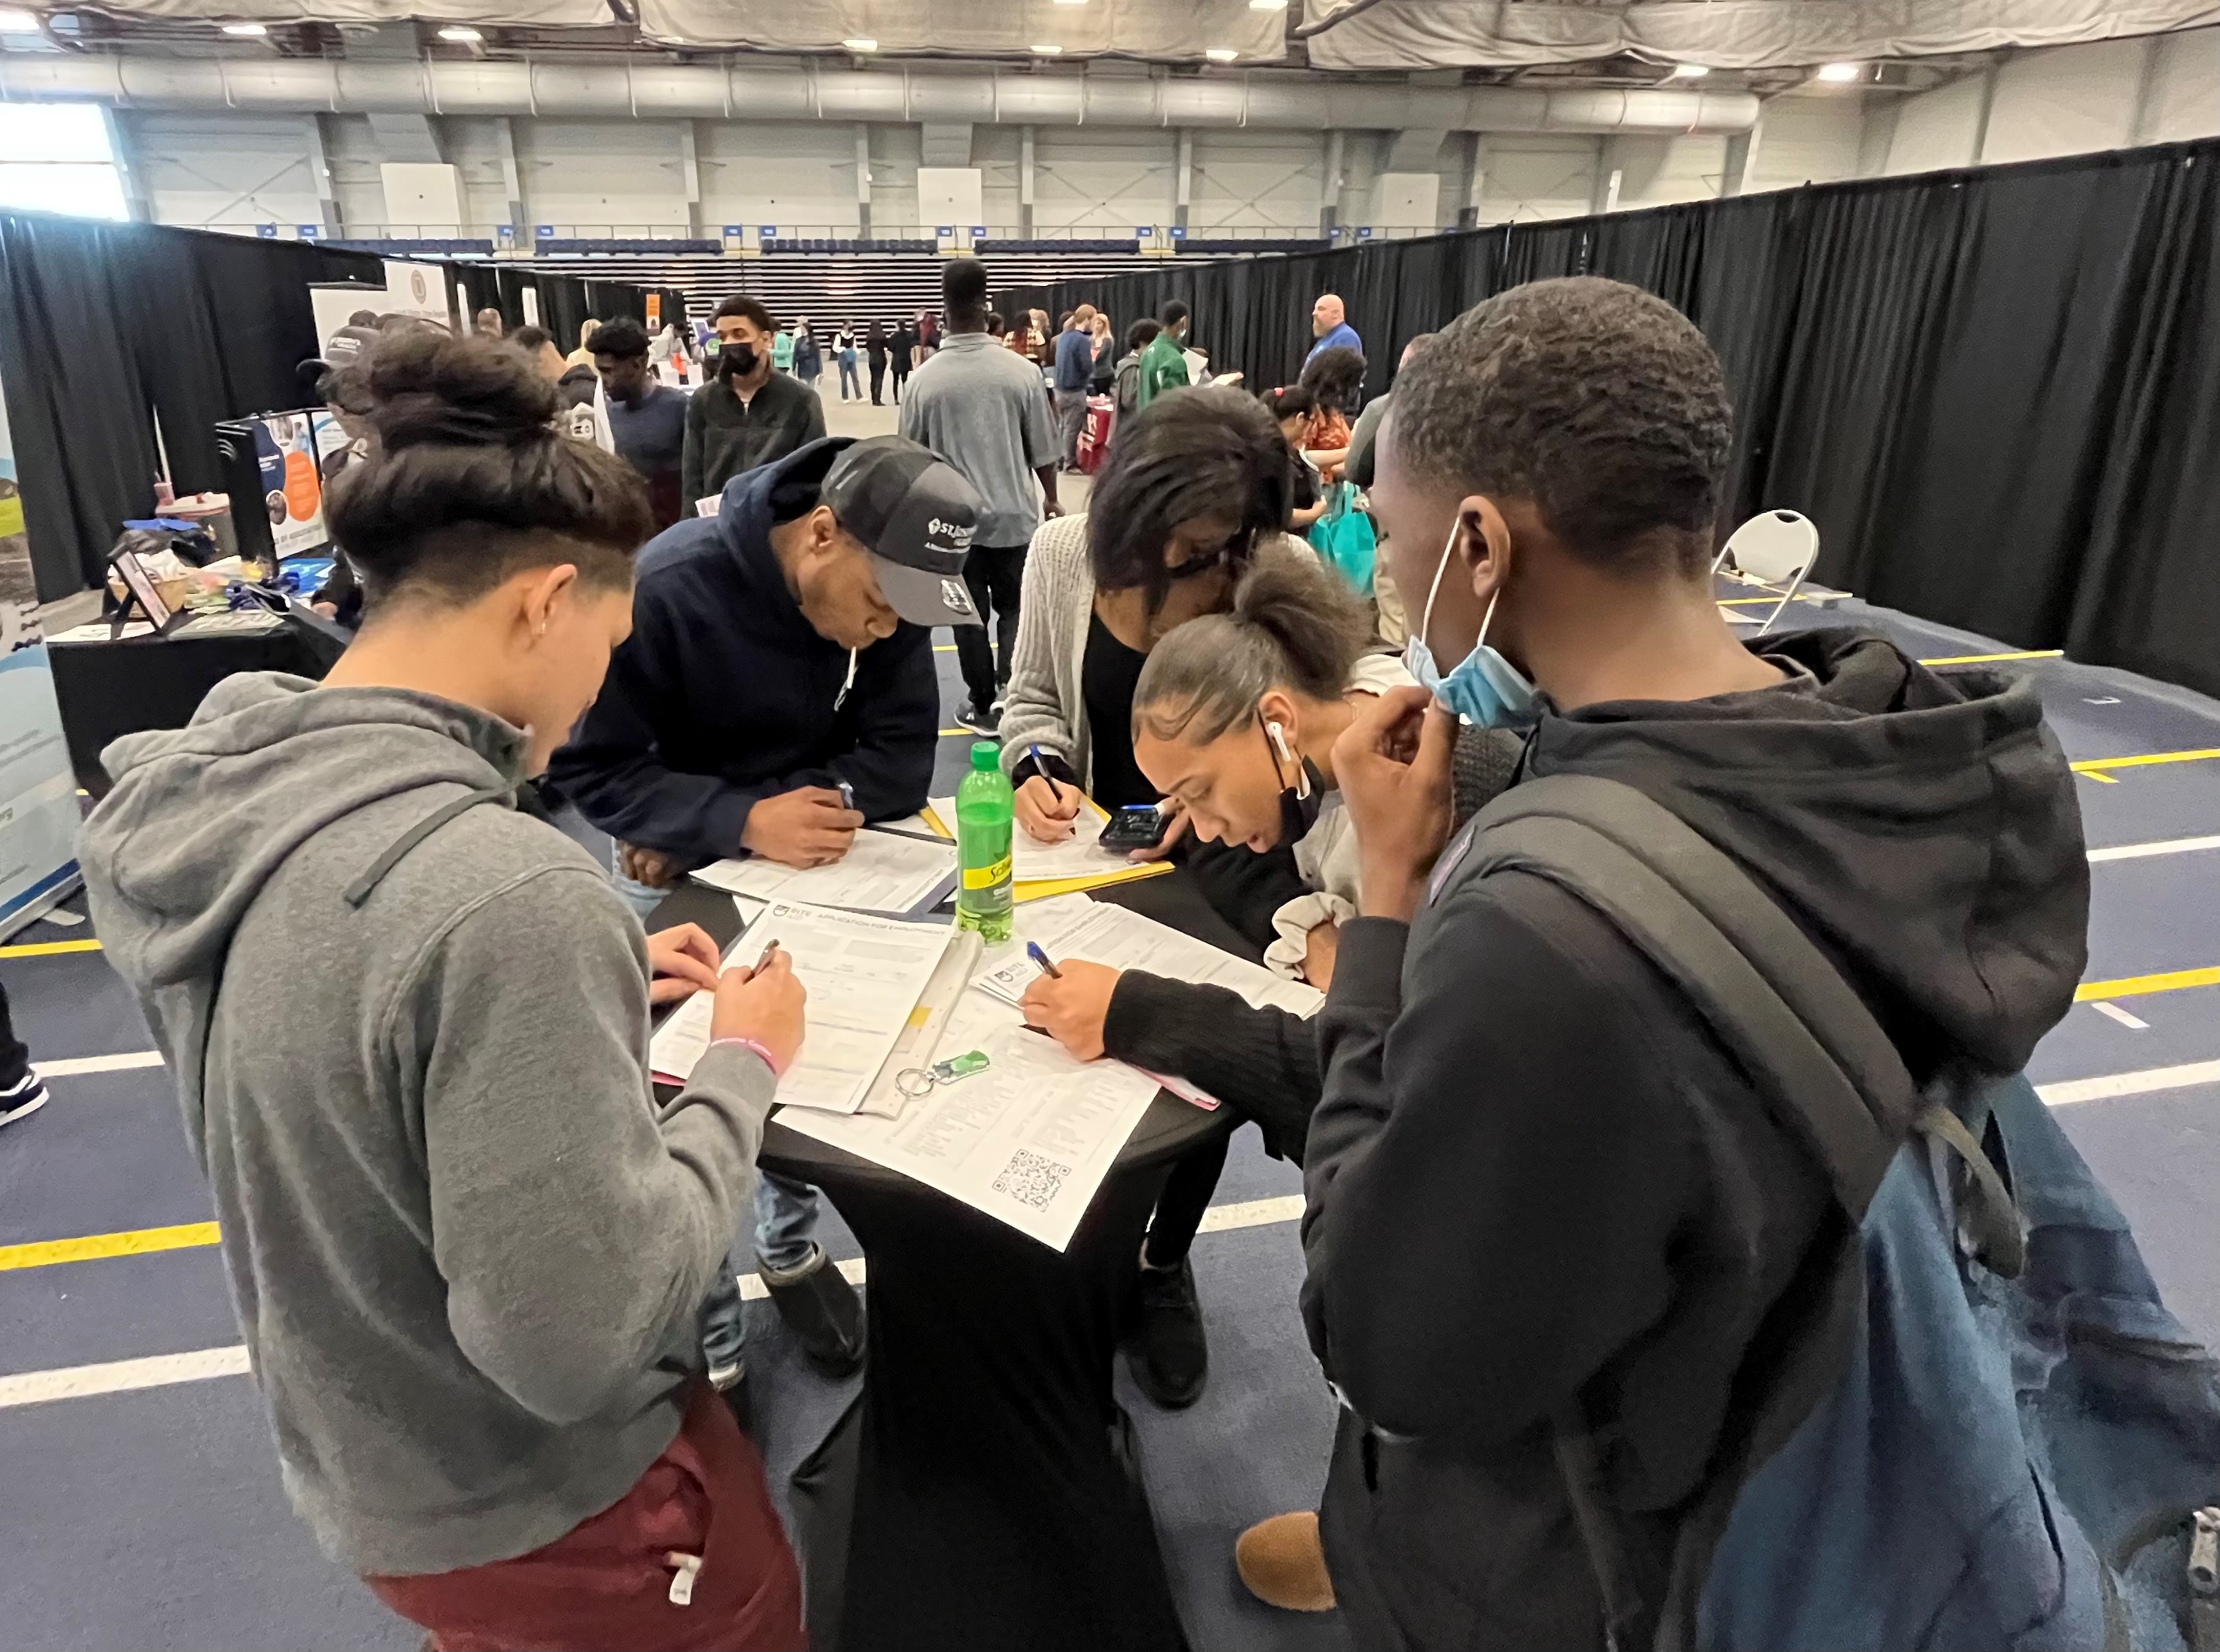 This is a photo of several students crowding around a round table, each completing a job application at a CTE Career Fair.